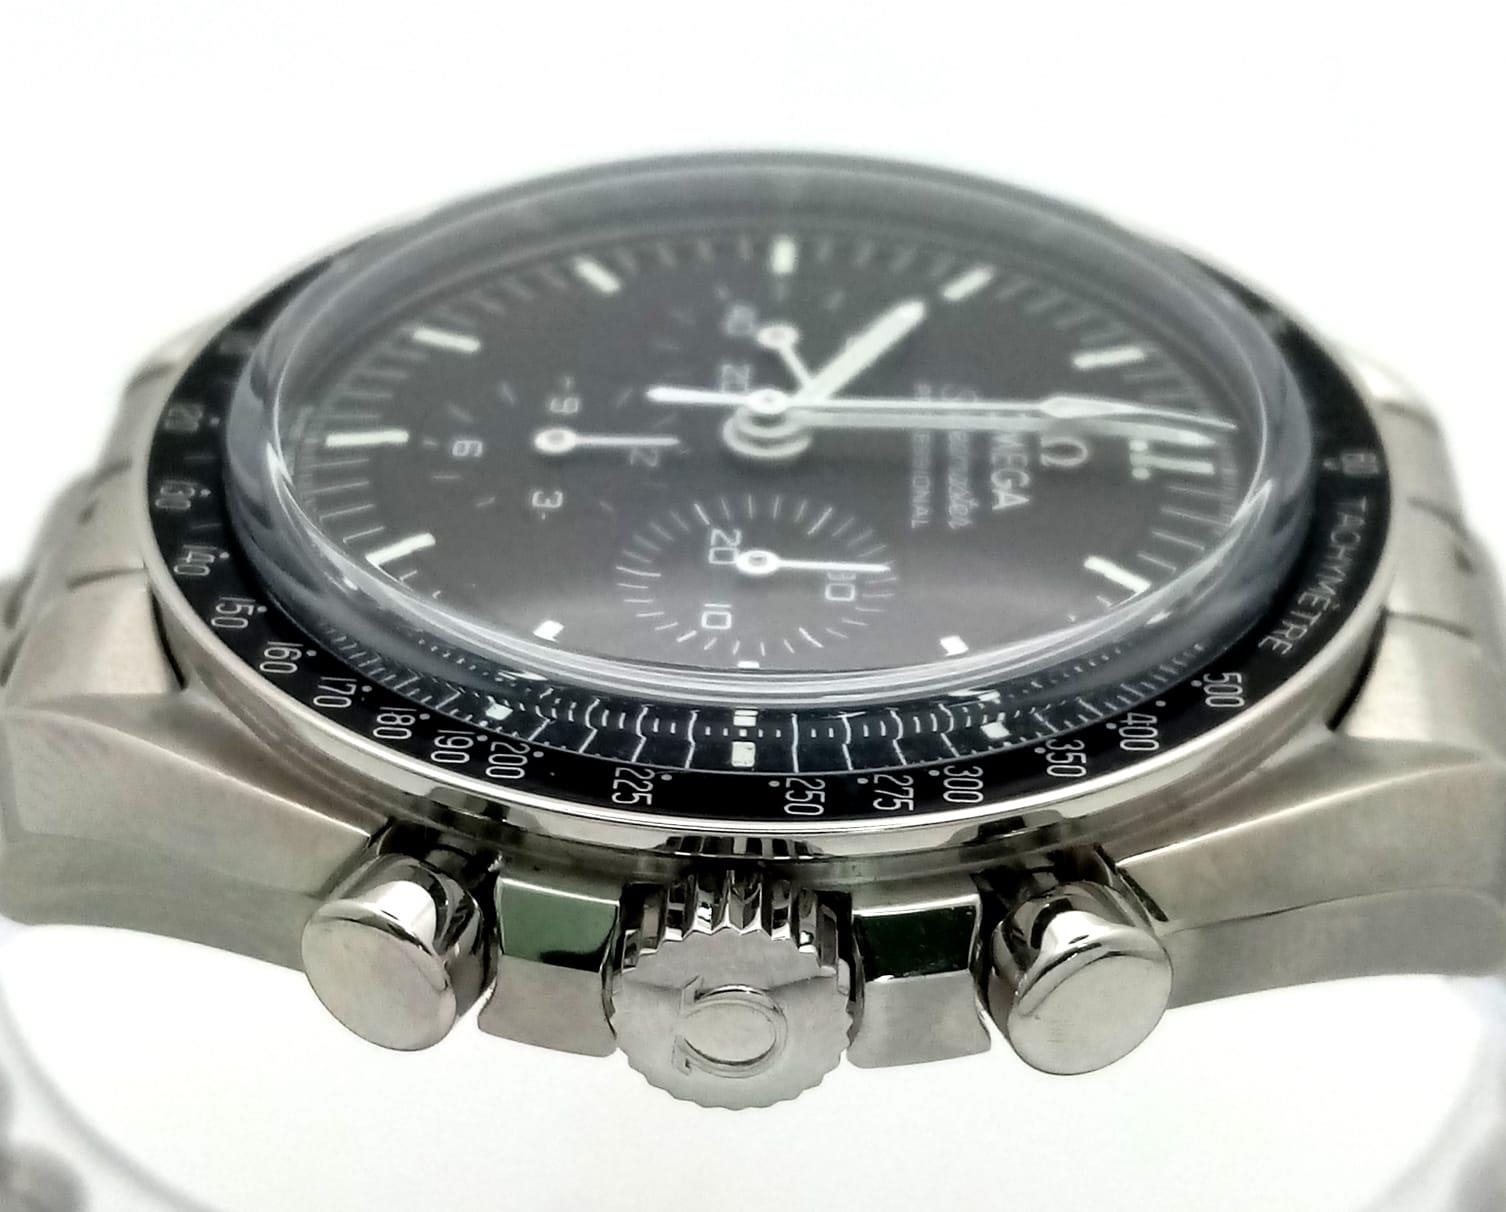 An Omega Speedmaster Moonwatch Chronograph Gents Watch. Stainless steel bracelet and case - 42mm. - Image 6 of 19